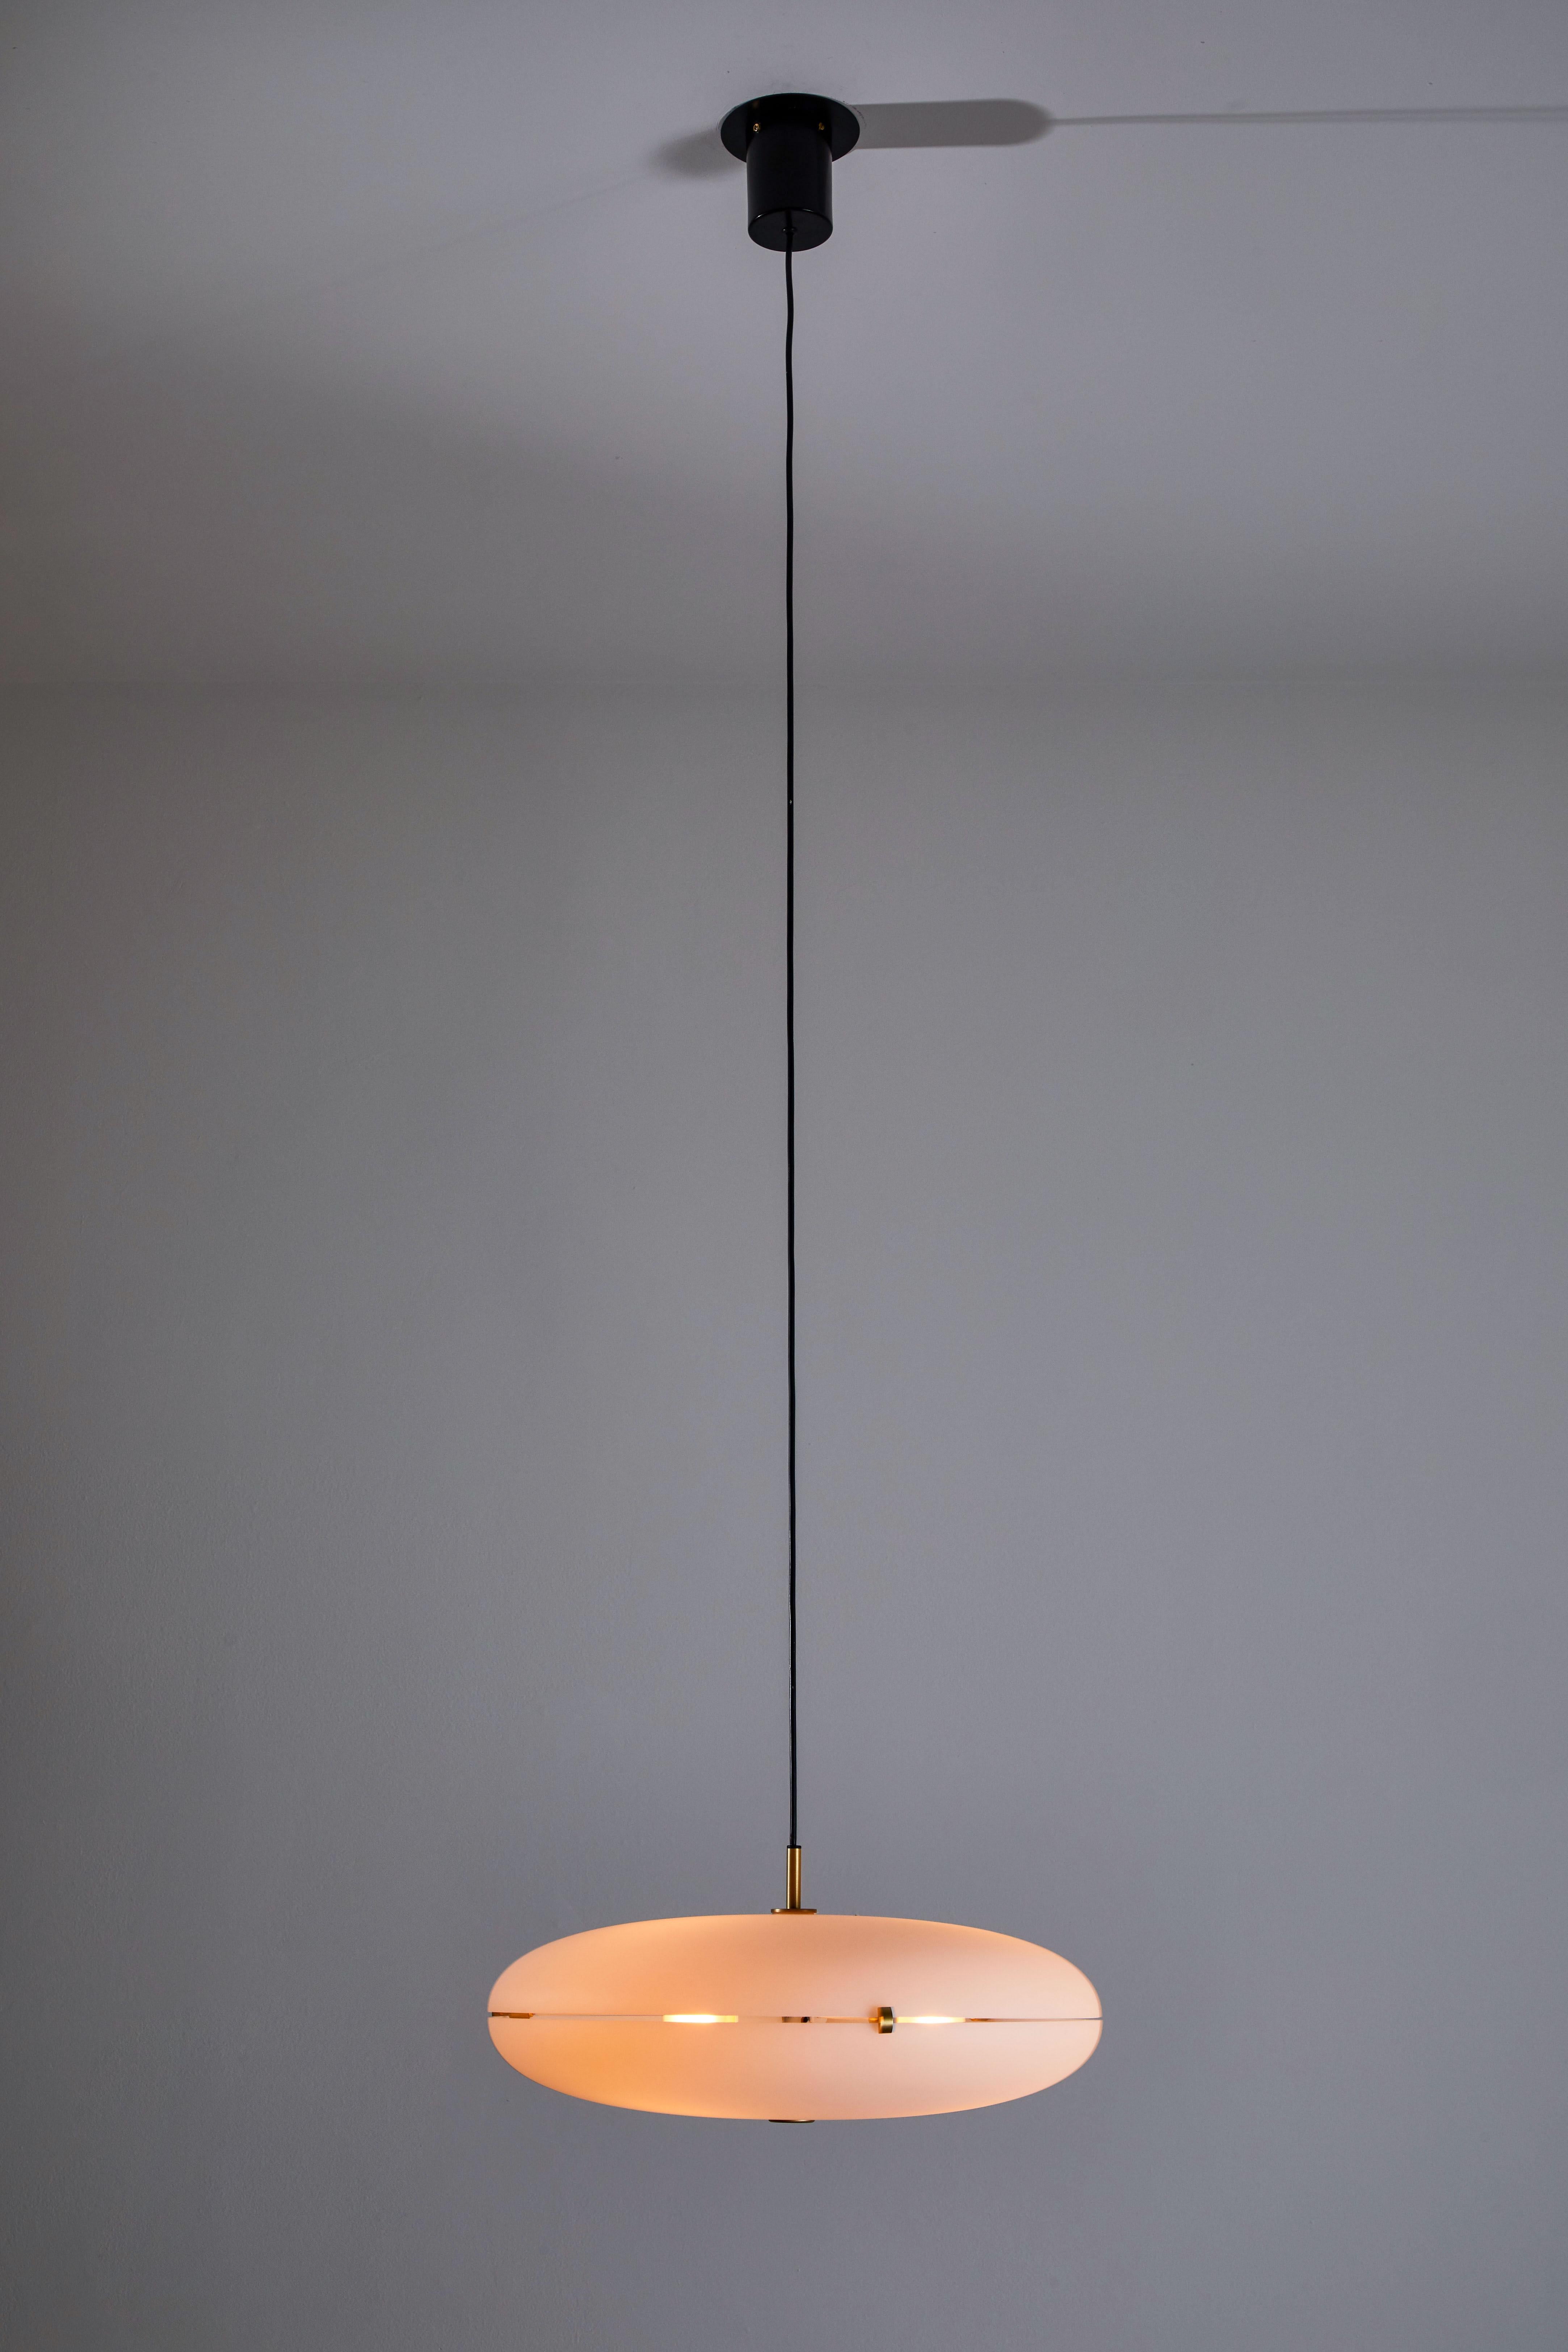 Luna suspension light by Gio Ponti for Tato Italia. Current production designed and manufactured in Italy 2018. Wired for US junction boxes. Brushed satin brass hardware, acrylic diffuser, steel canopy. Takes 3 x LED maximum 11W bulbs, or one E27